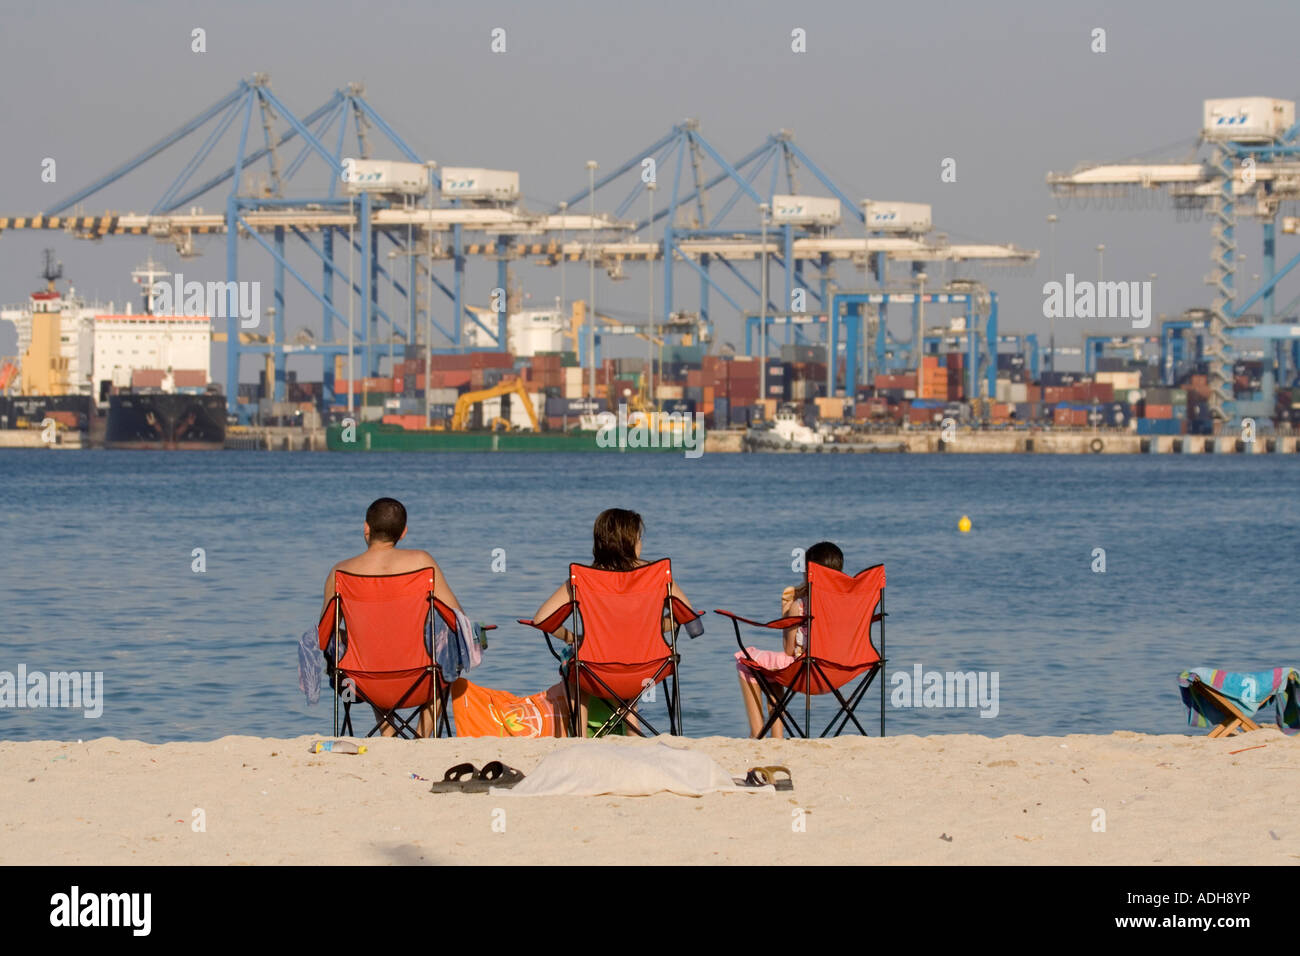 A family on a beach next to a container port at Pretty Bay, Birzebbuga, Malta. Economic development, quality of life, land use and geography. Stock Photo